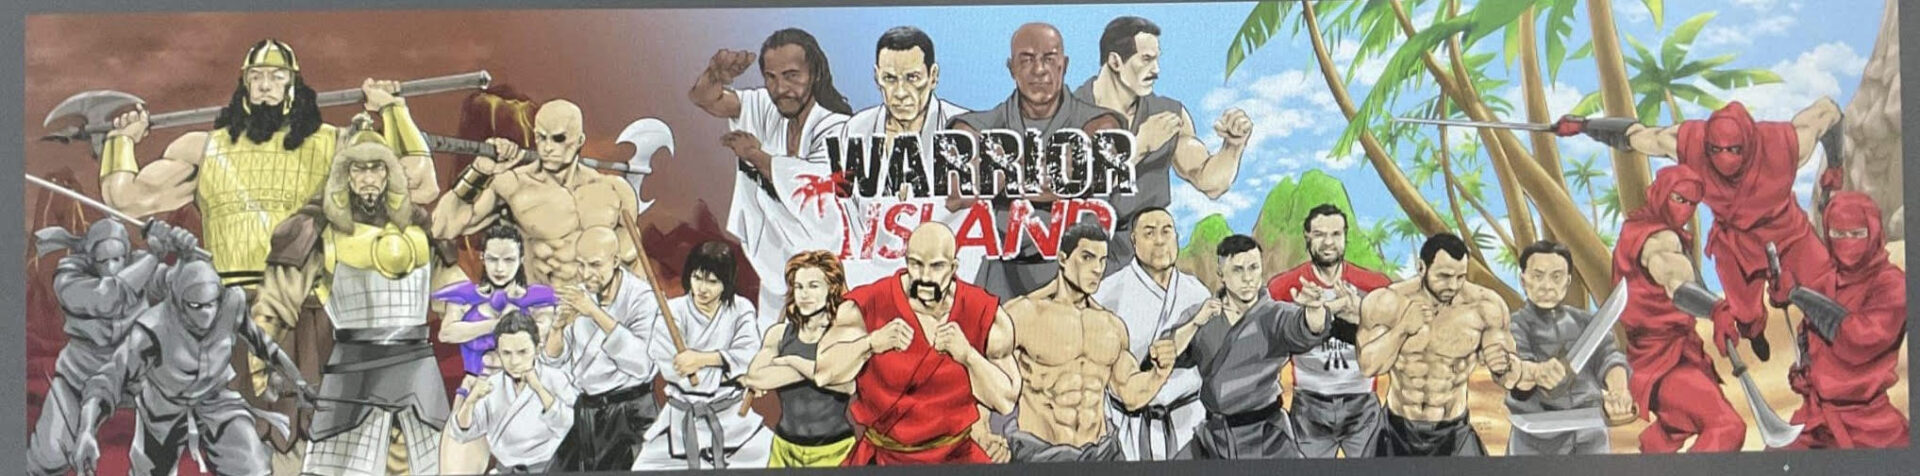 Full banner of Warrior Island showing complete characters